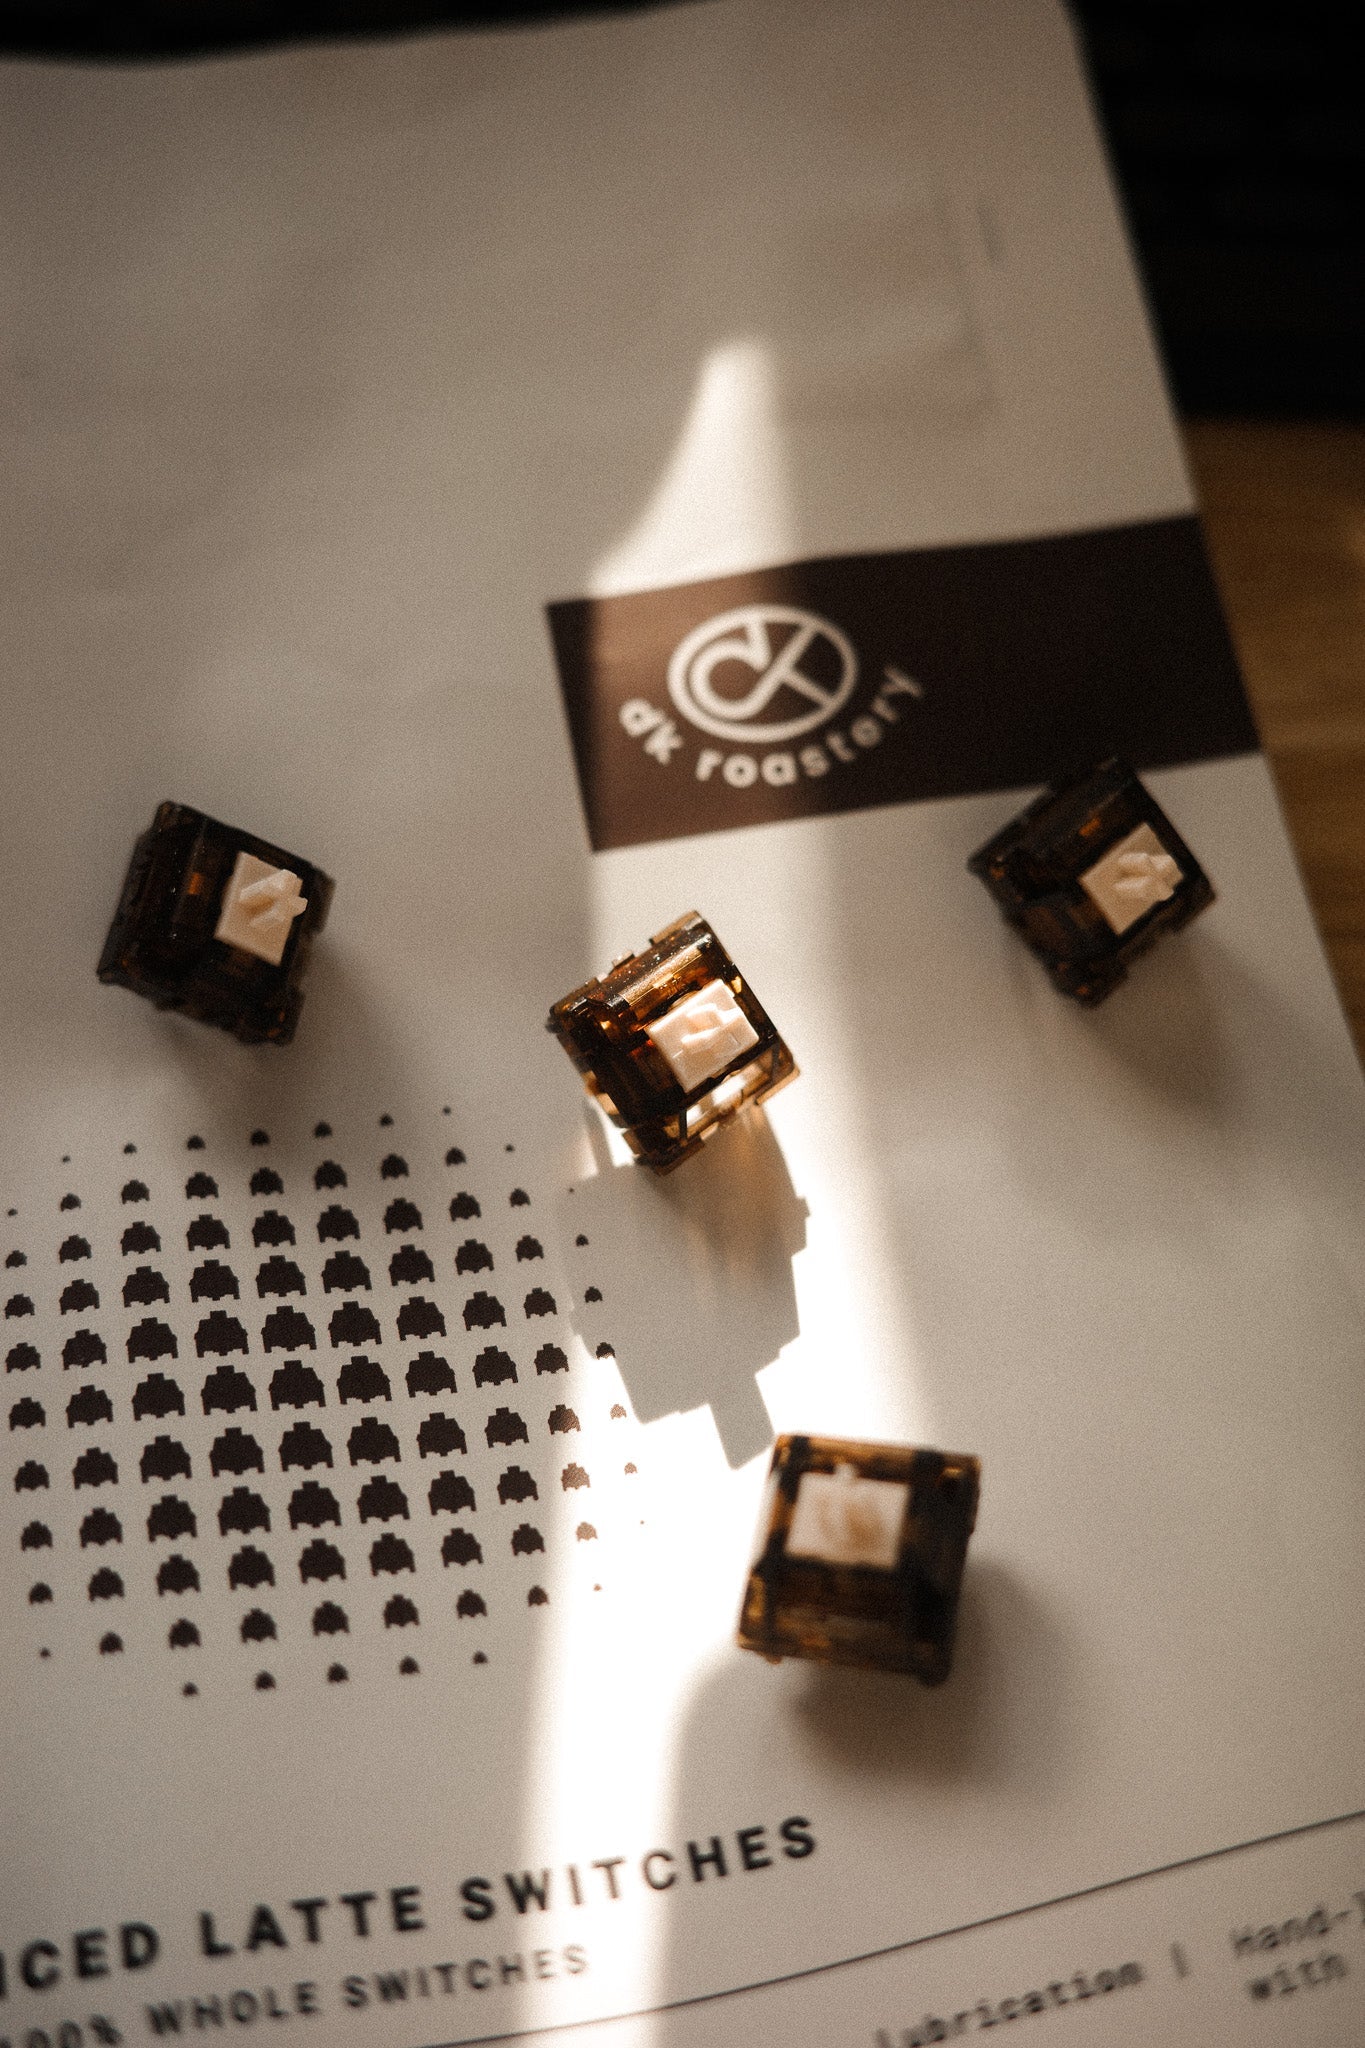 DK Roastery - Iced Latte Linear Switches